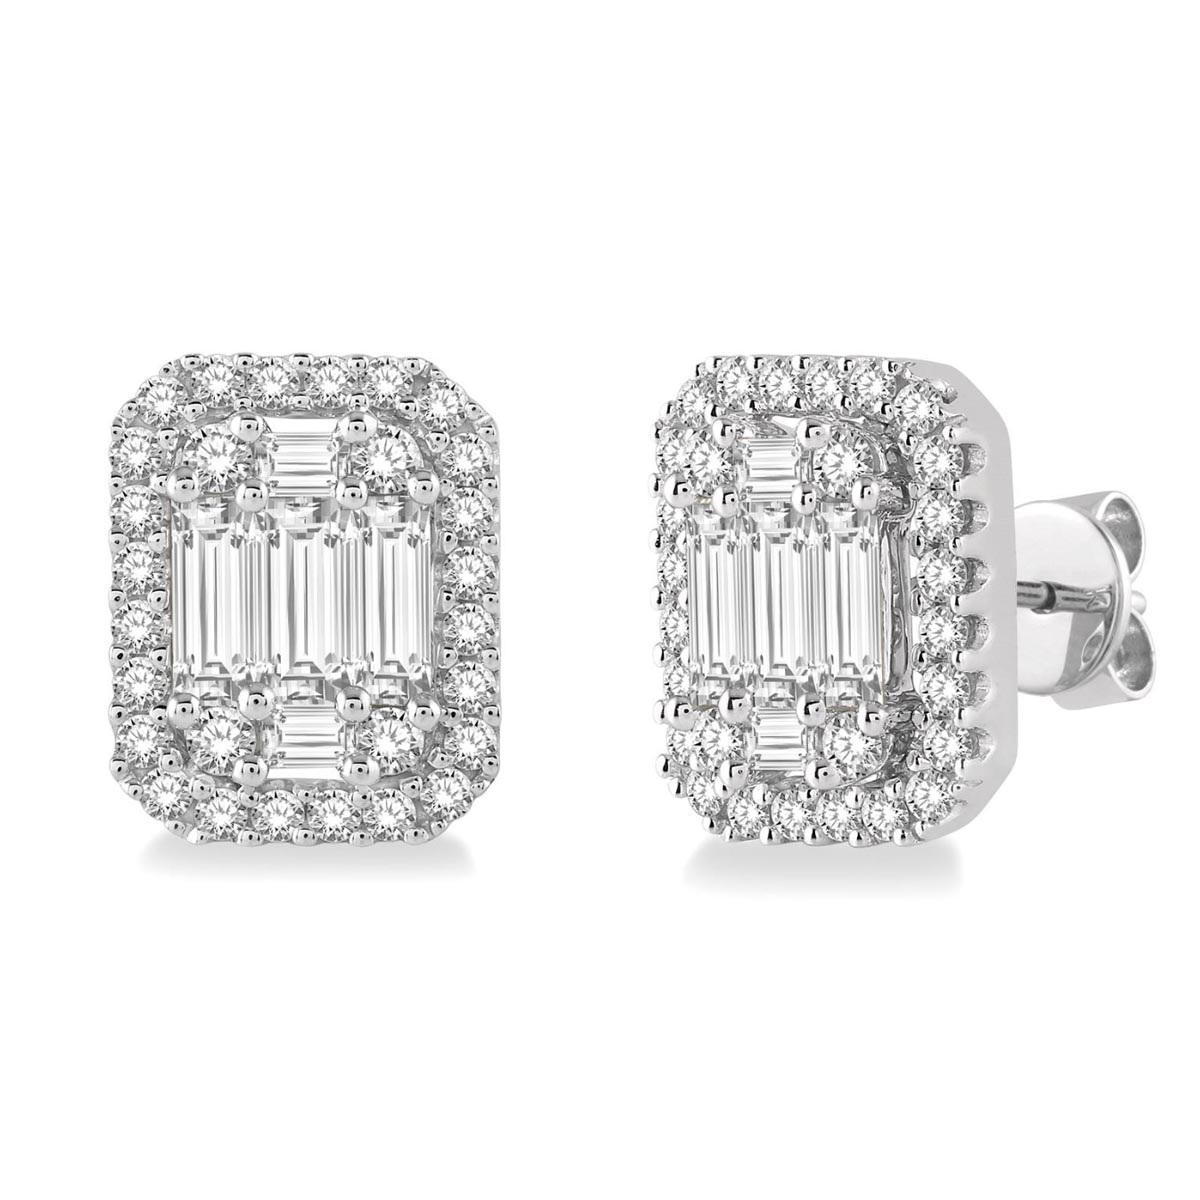 Baguette and Round Diamond Stud Earrings in 14kt White Gold (3/4ct tw)